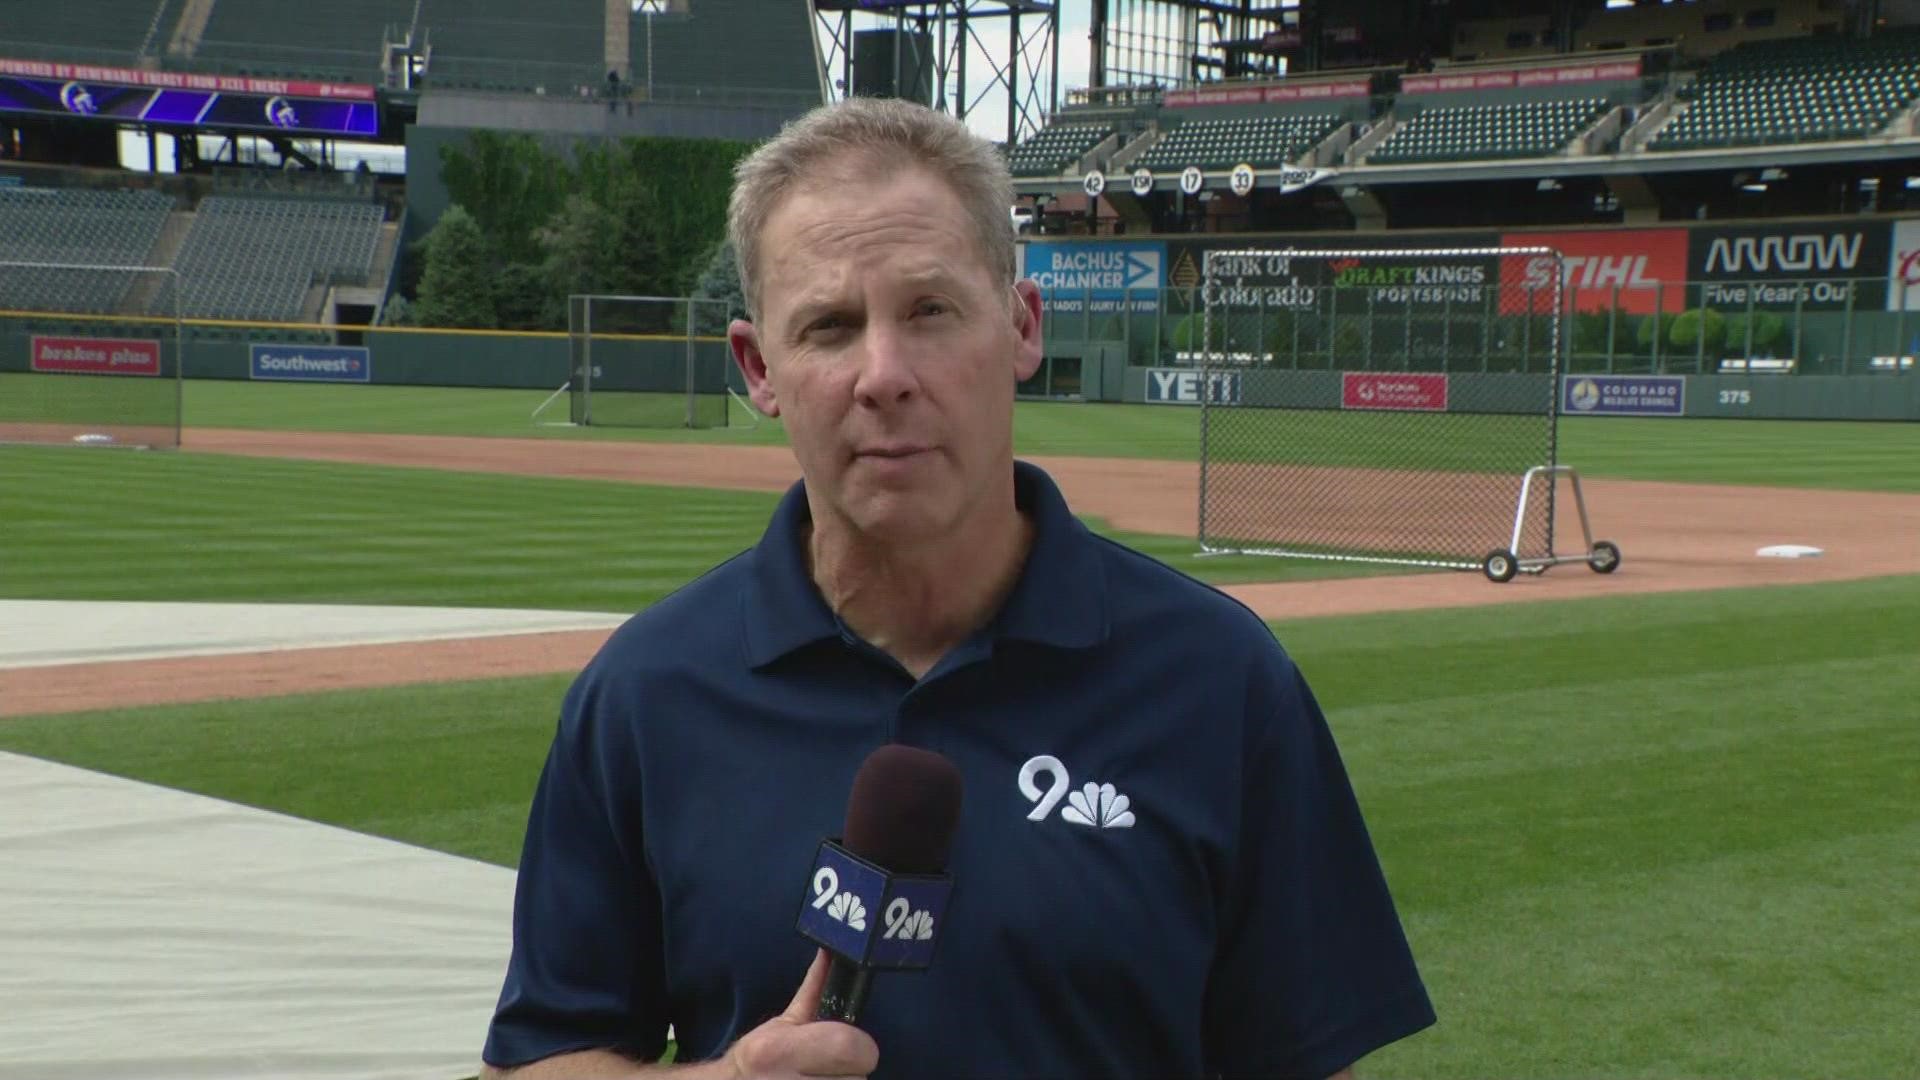 Rod Mackey's out at Coors Field ahead of Wednesday night Rockies game where the Avs will be honored for their Stanley Cup win.